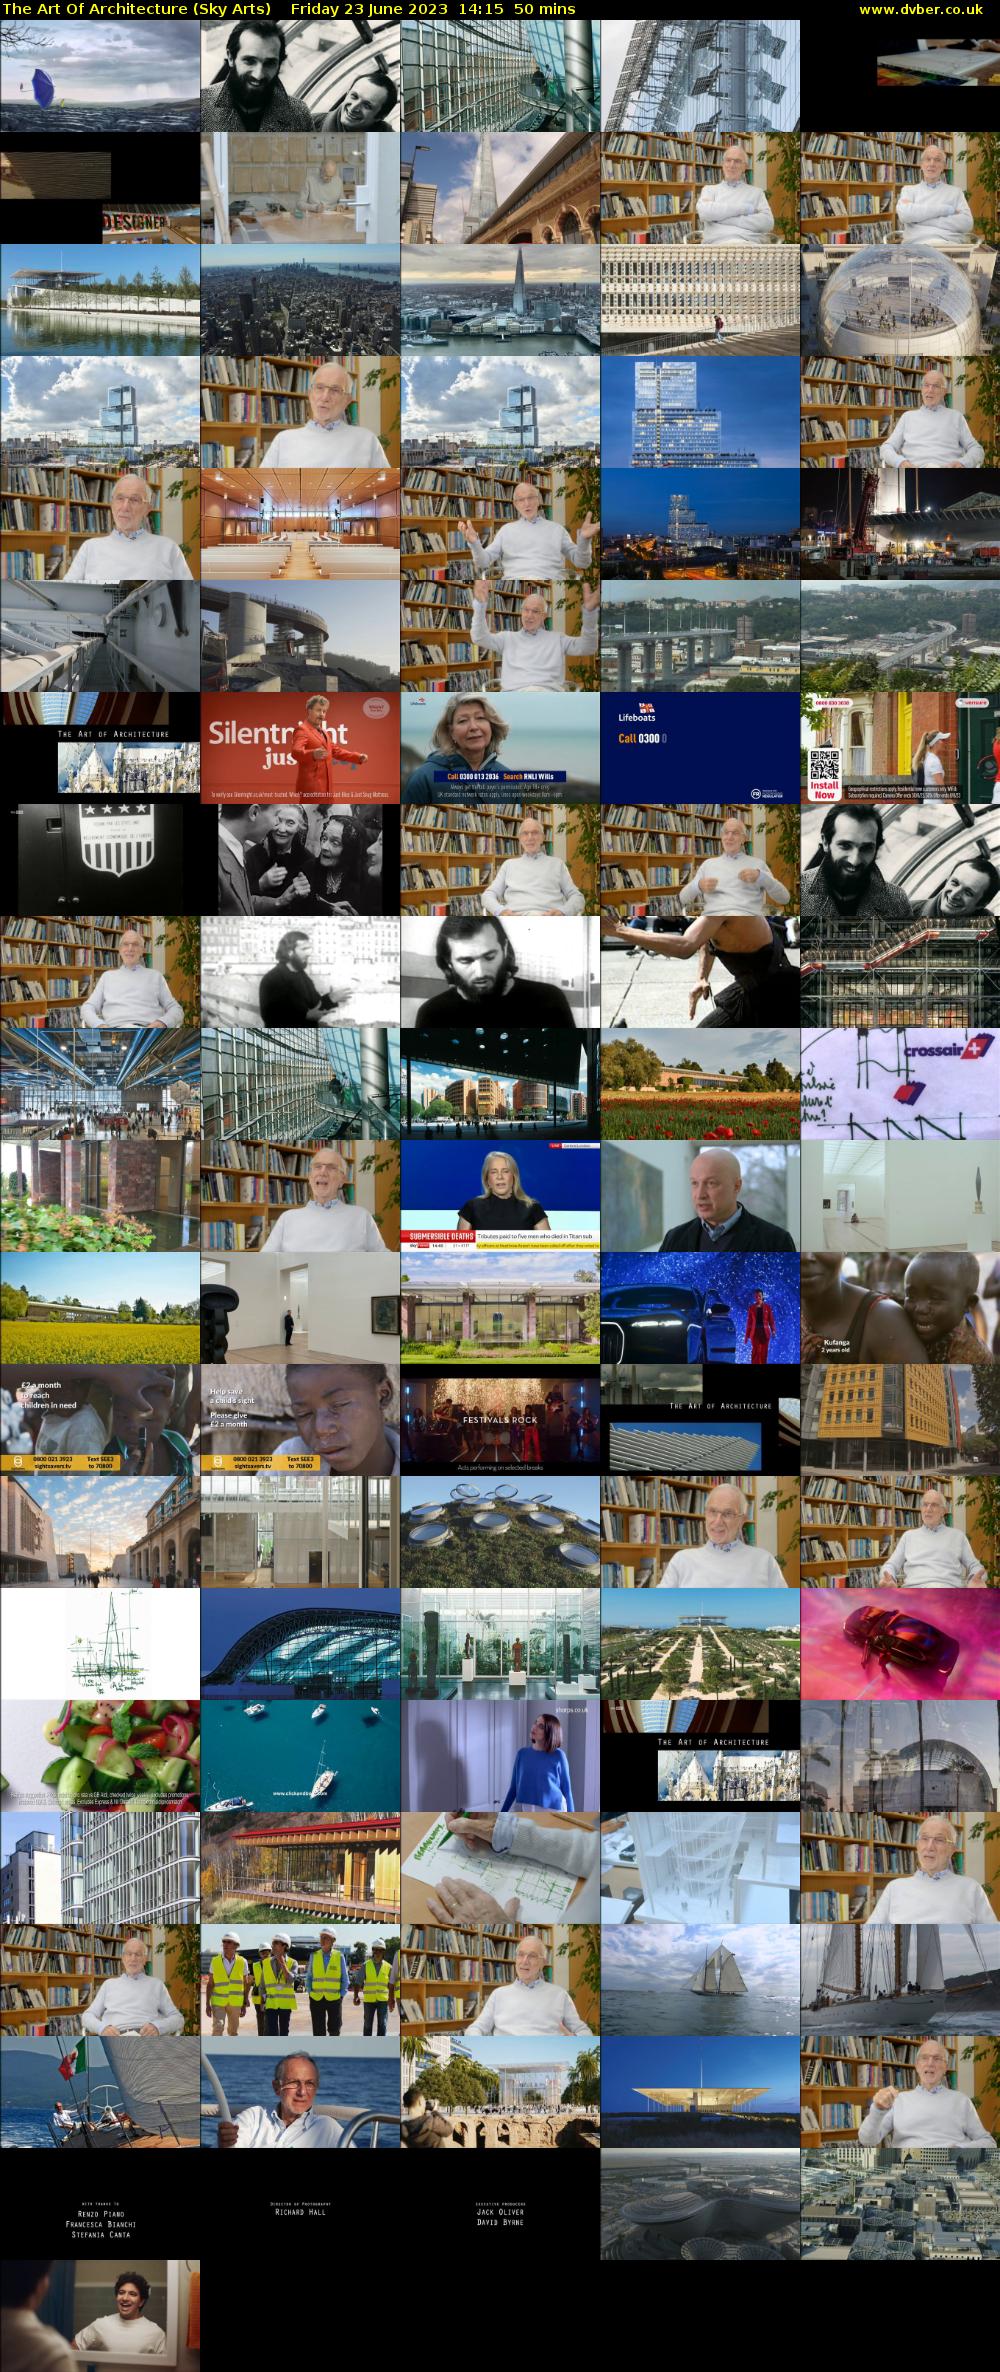 The Art Of Architecture (Sky Arts) Friday 23 June 2023 14:15 - 15:05